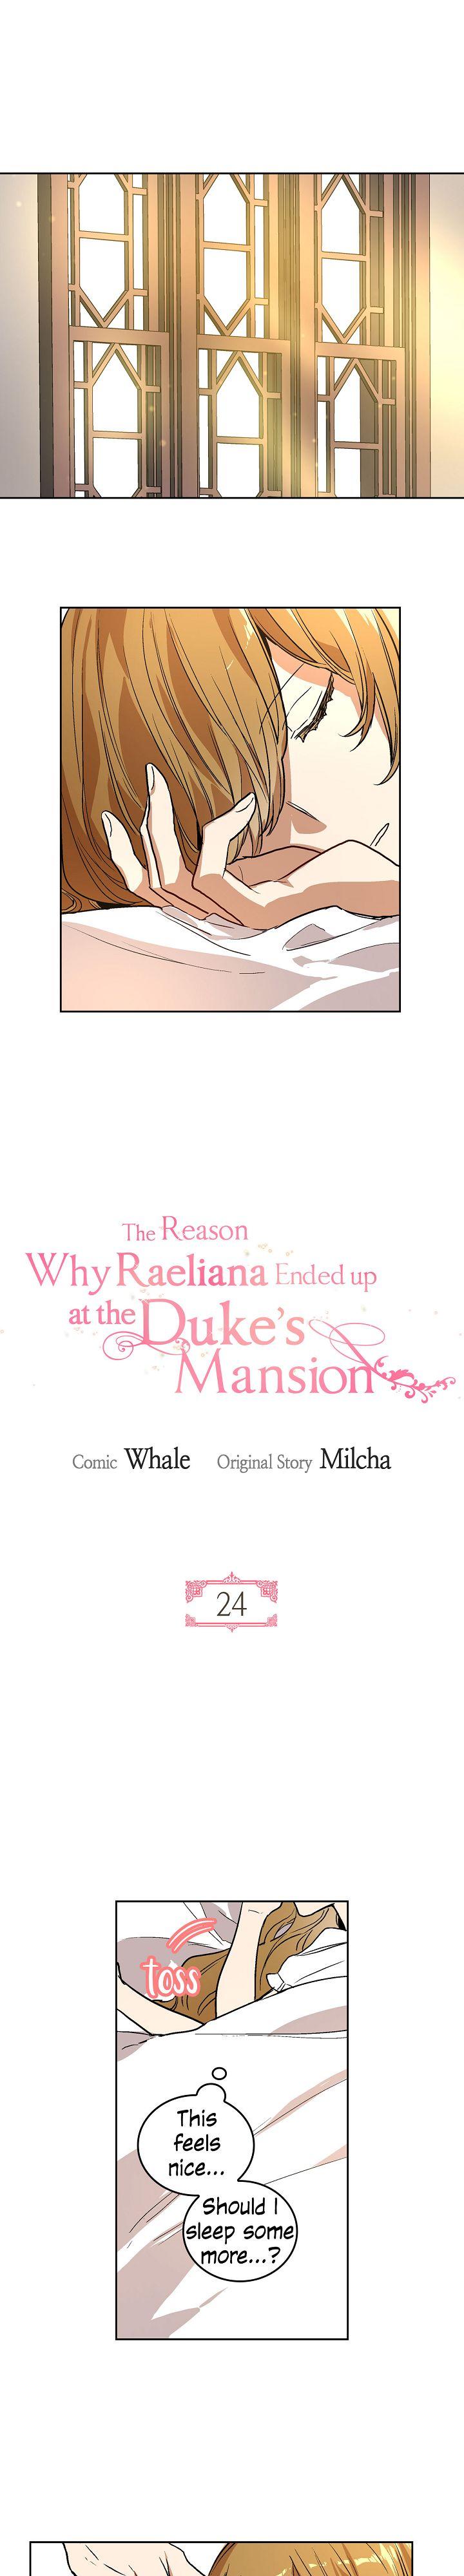 The Reason Why Raeliana Ended up at the Duke’s Mansion - Chapter 24 Page 2